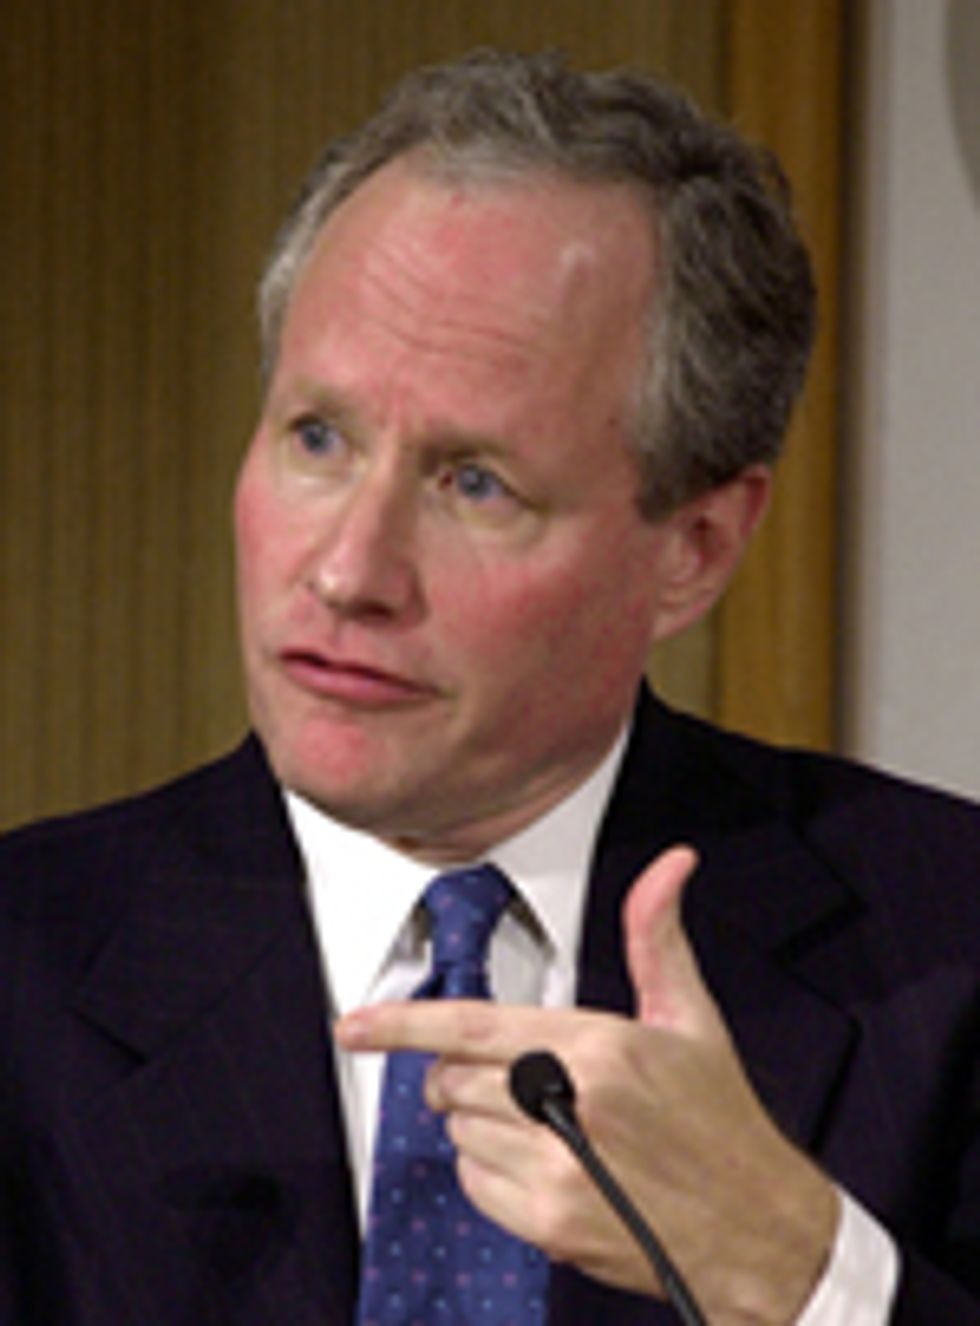 Bill Kristol: Spend Money On Military, Not Fanciful Green Thingies